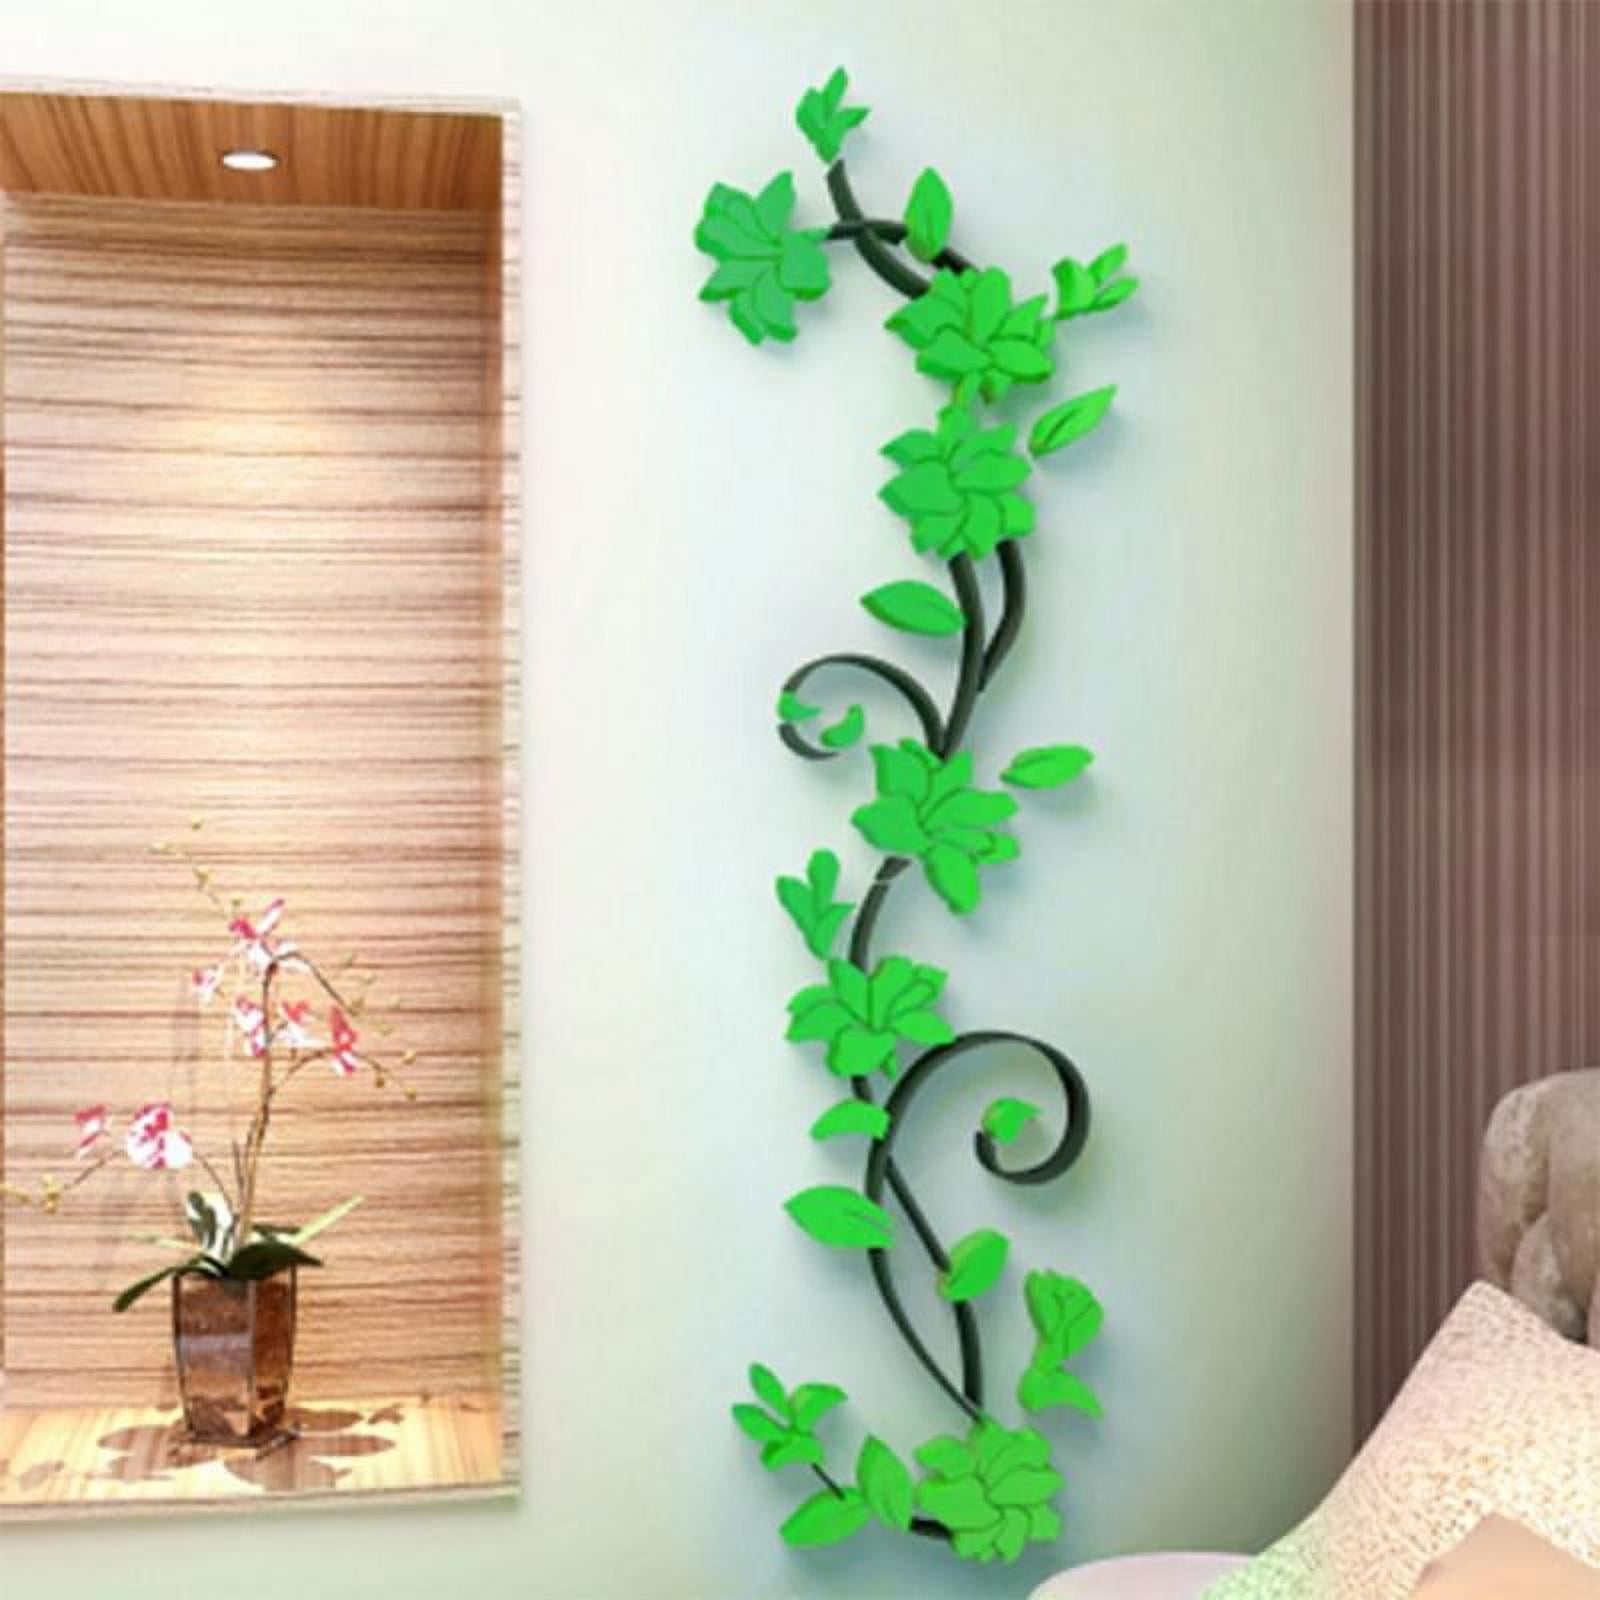 Removable Leaf Flowers Mural Wall Stickers Decal DIY Room Decor PVC Art Sticker 